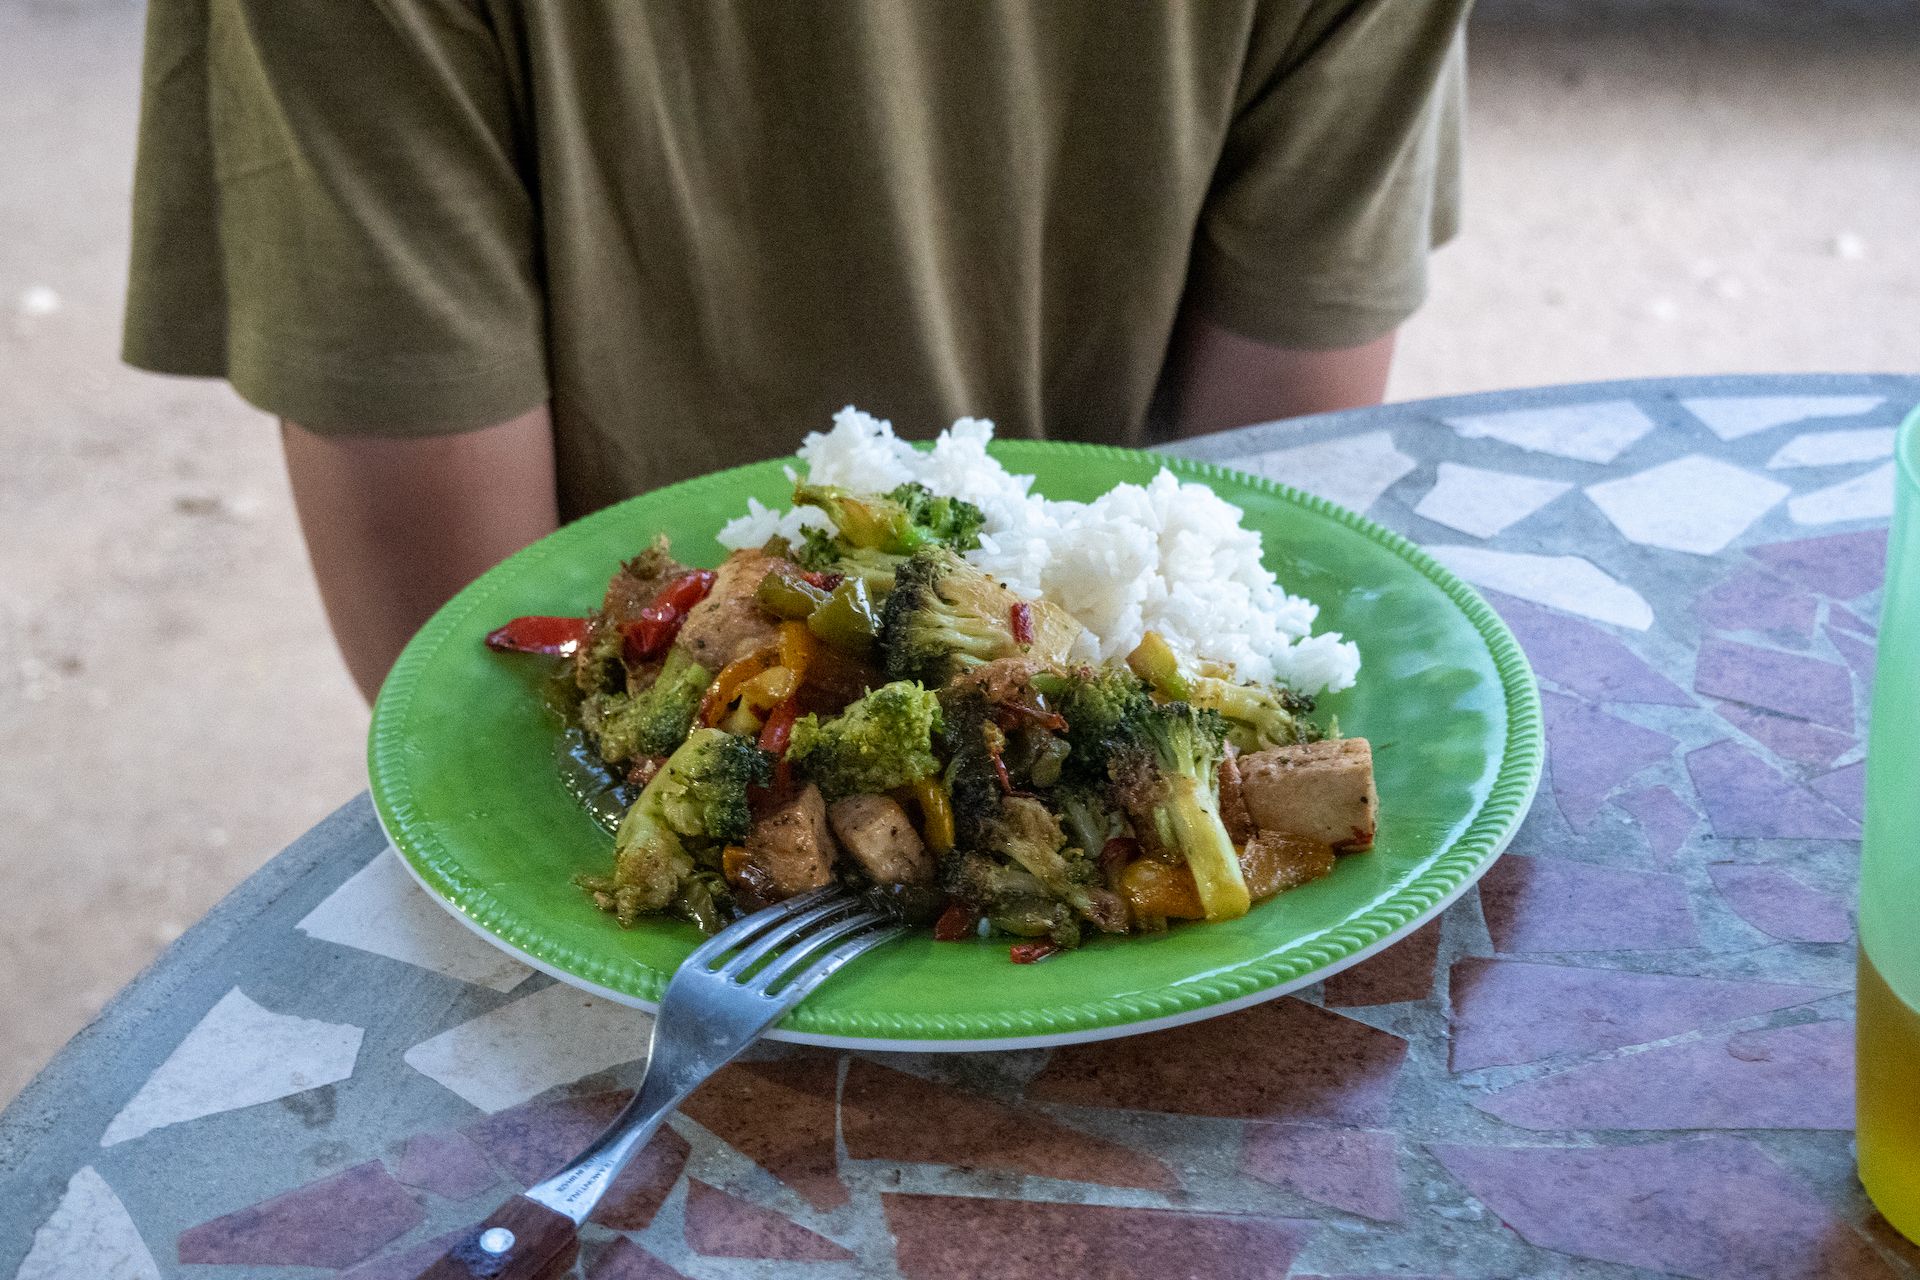 Kuan cooked her famous rice, tofu and vegetable stir fry. Delicious!